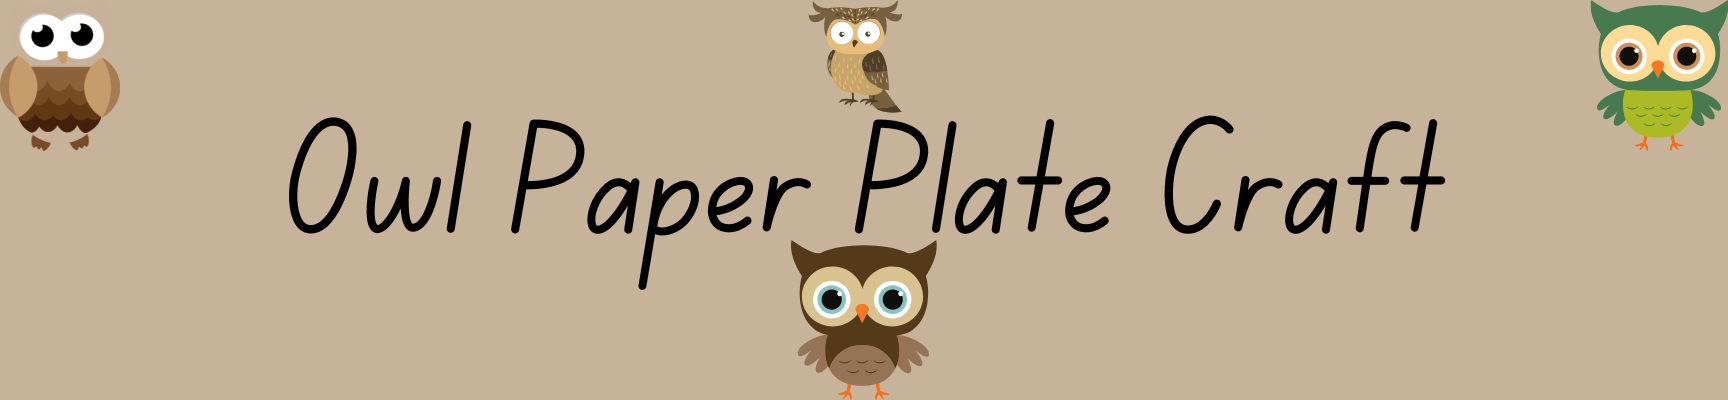 How to Create an Owl Paper Plate Craft